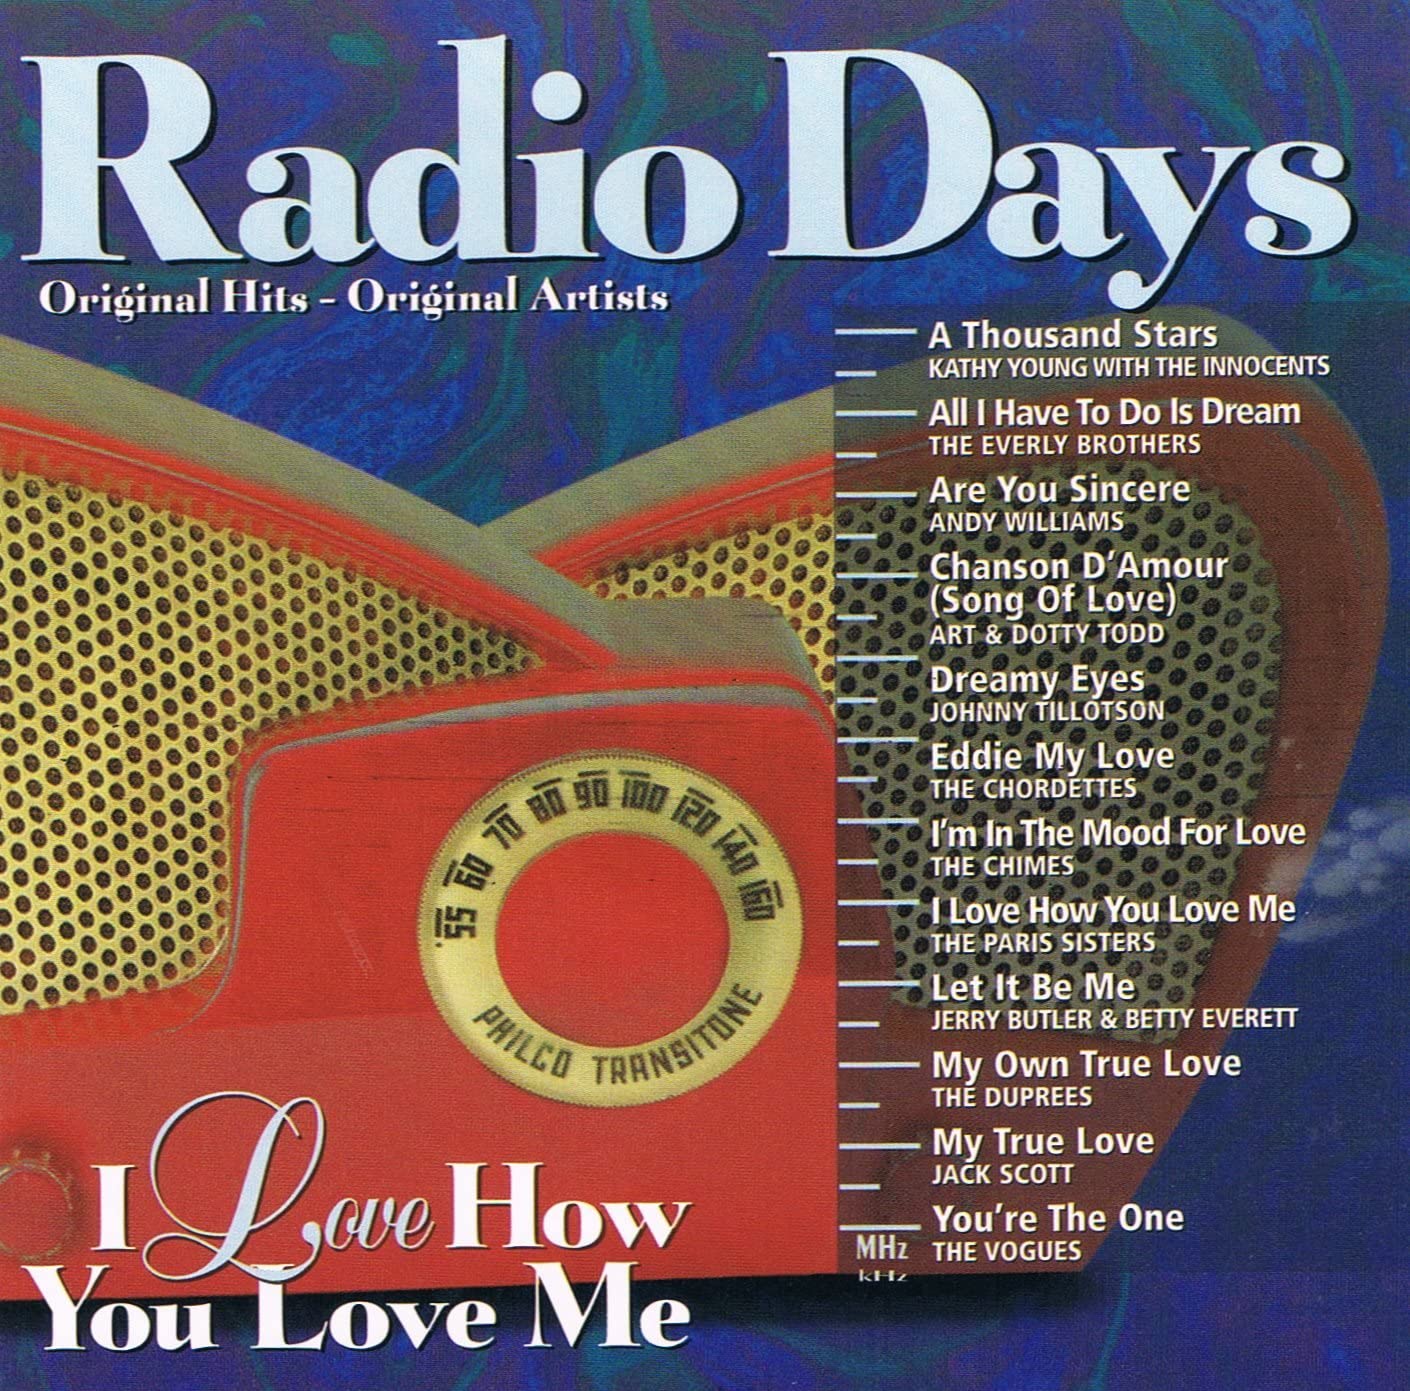 Radio Days - I Love How You Love Me (12 Original Hits) [Audio CD] Various Artists/ Andy Williams/ Johnny Tillotson/ The Chordettes/ The Chimes/ The Paris Sisters/ The Duprees/ Jack Scott